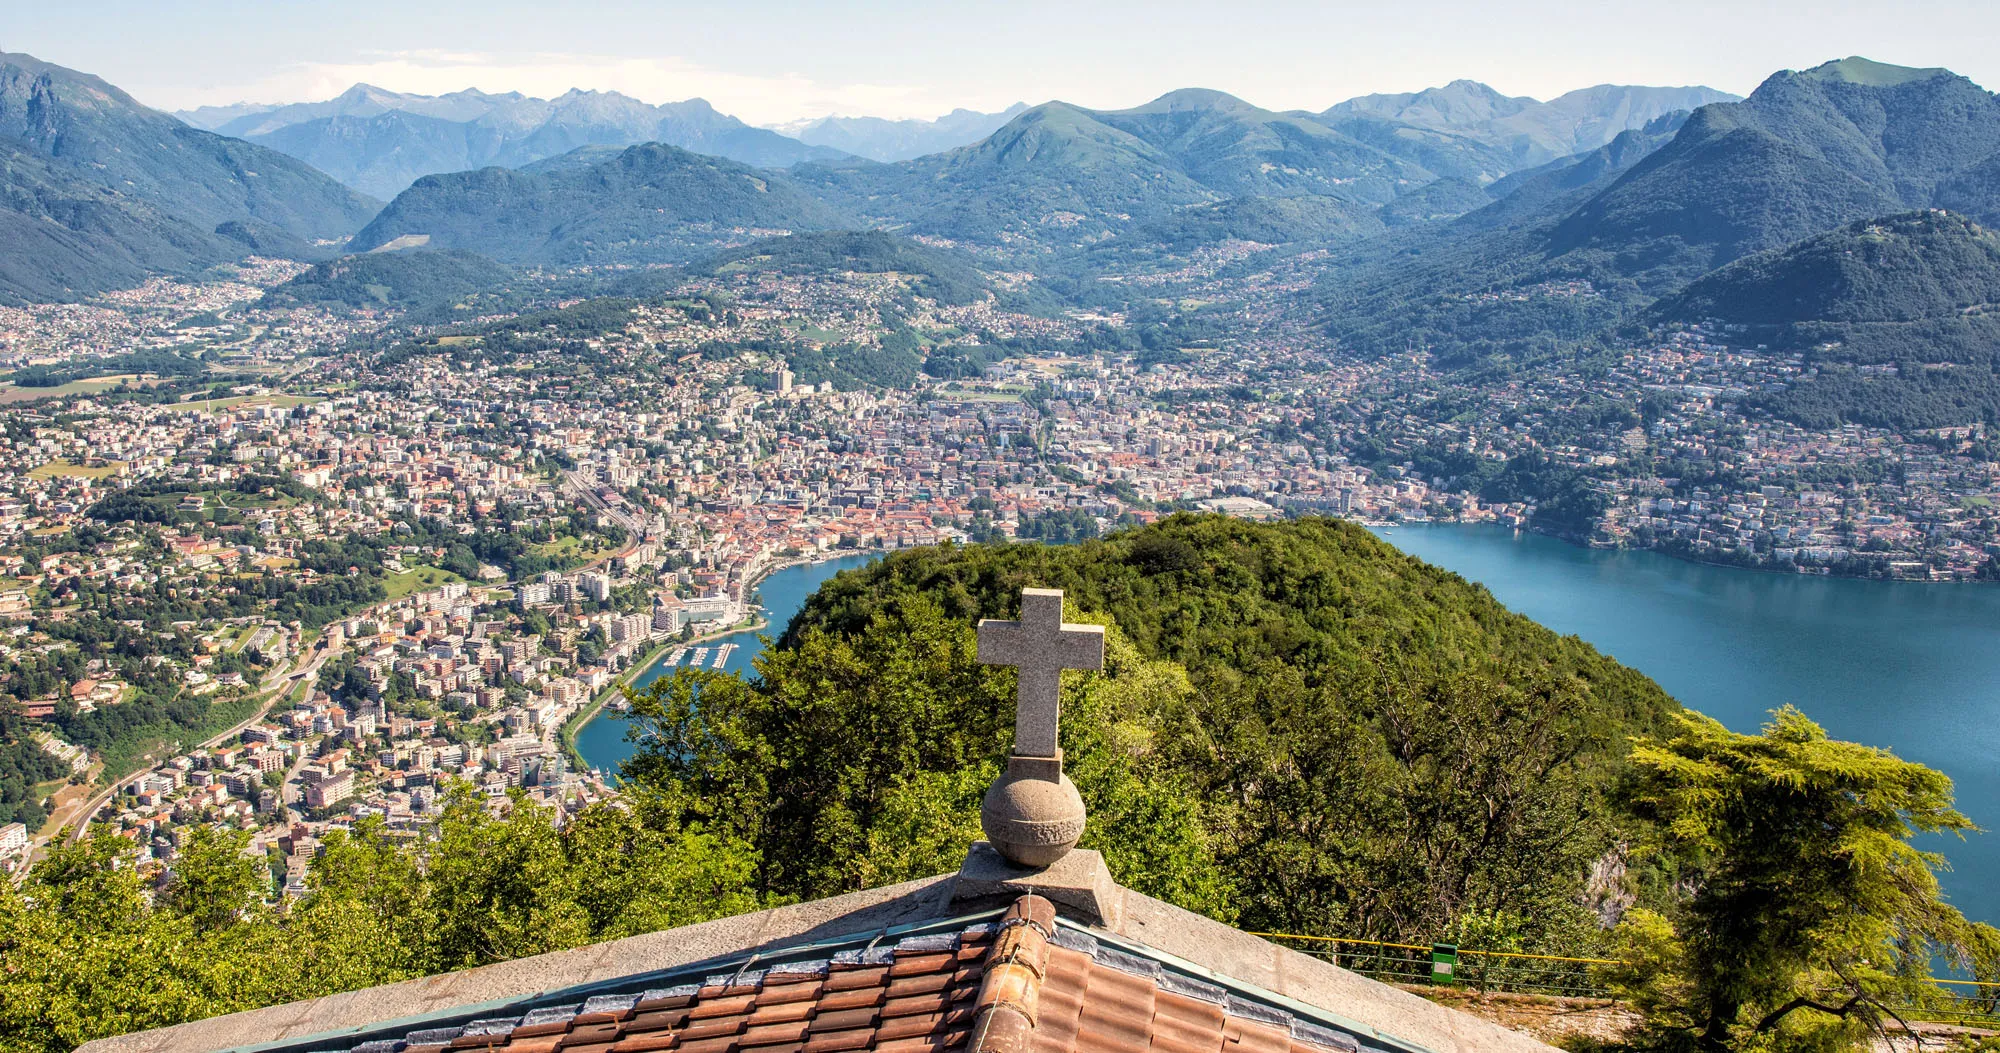 Featured image for “Lugano, Switzerland: What to Do, Where to Eat & Where to Stay”